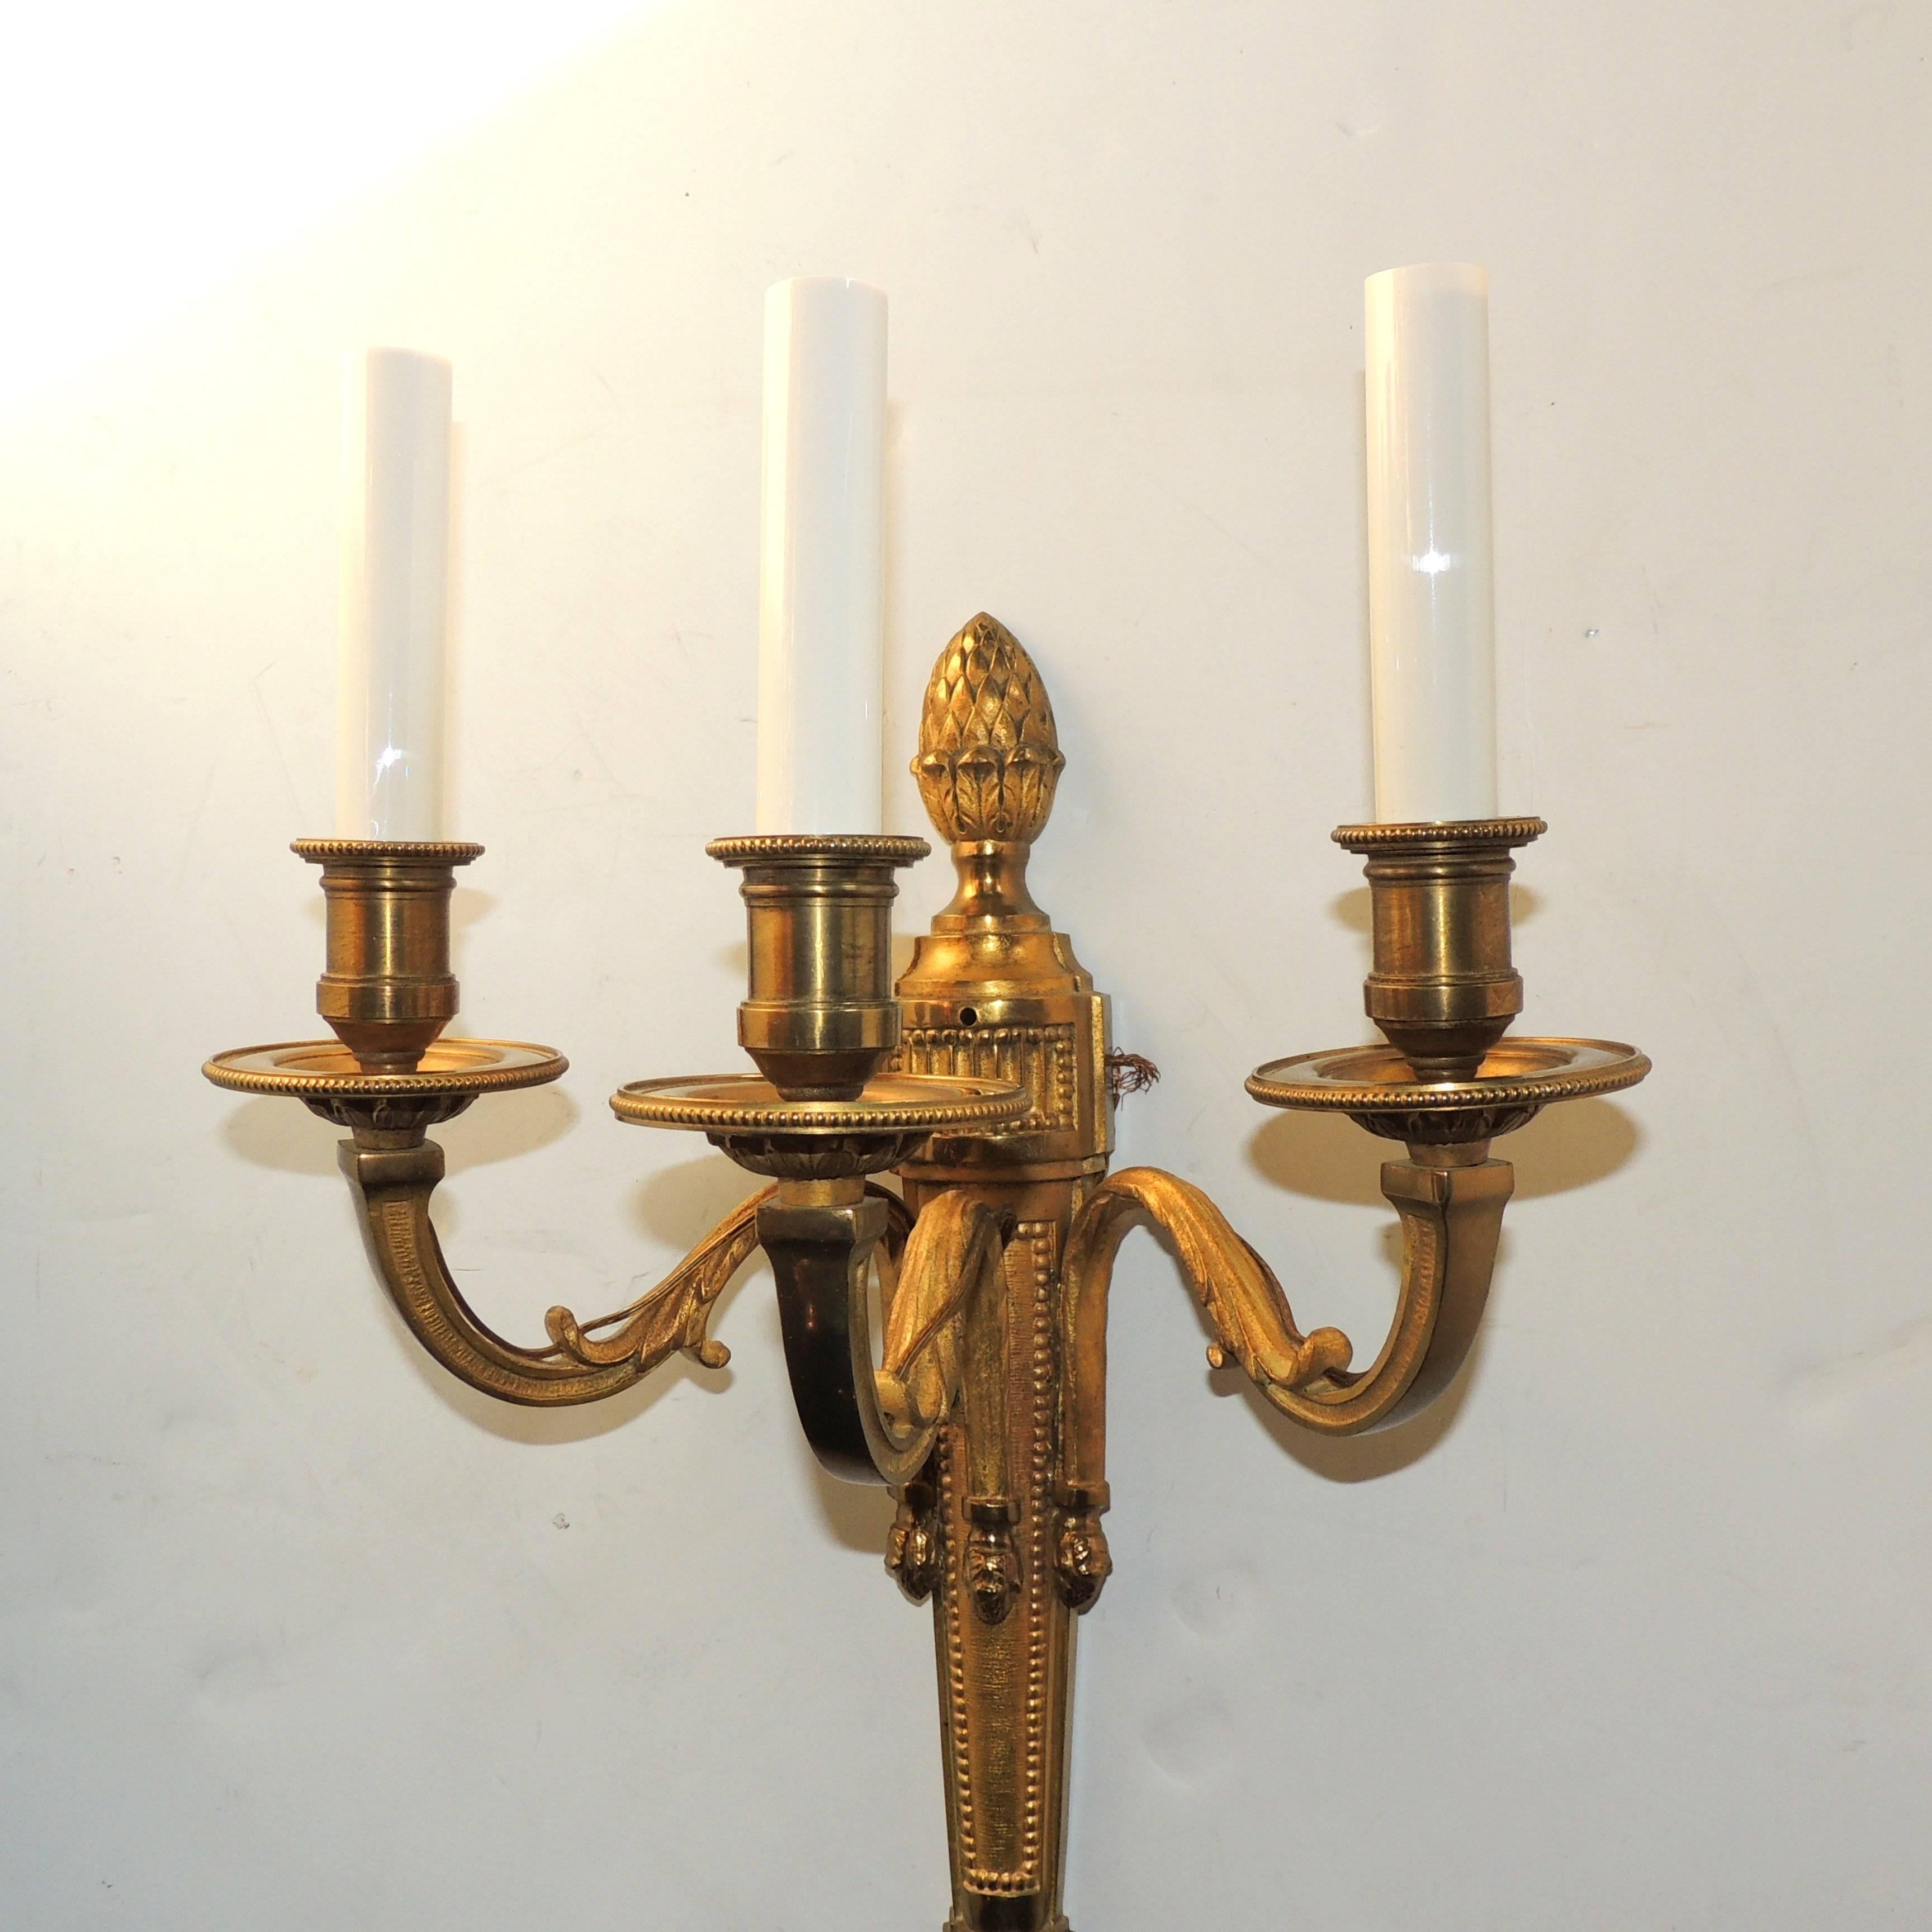 Mid-20th Century Wonderful Pair Neoclassical Urn Three-Arm Regency Caldwell Empire Sconces For Sale